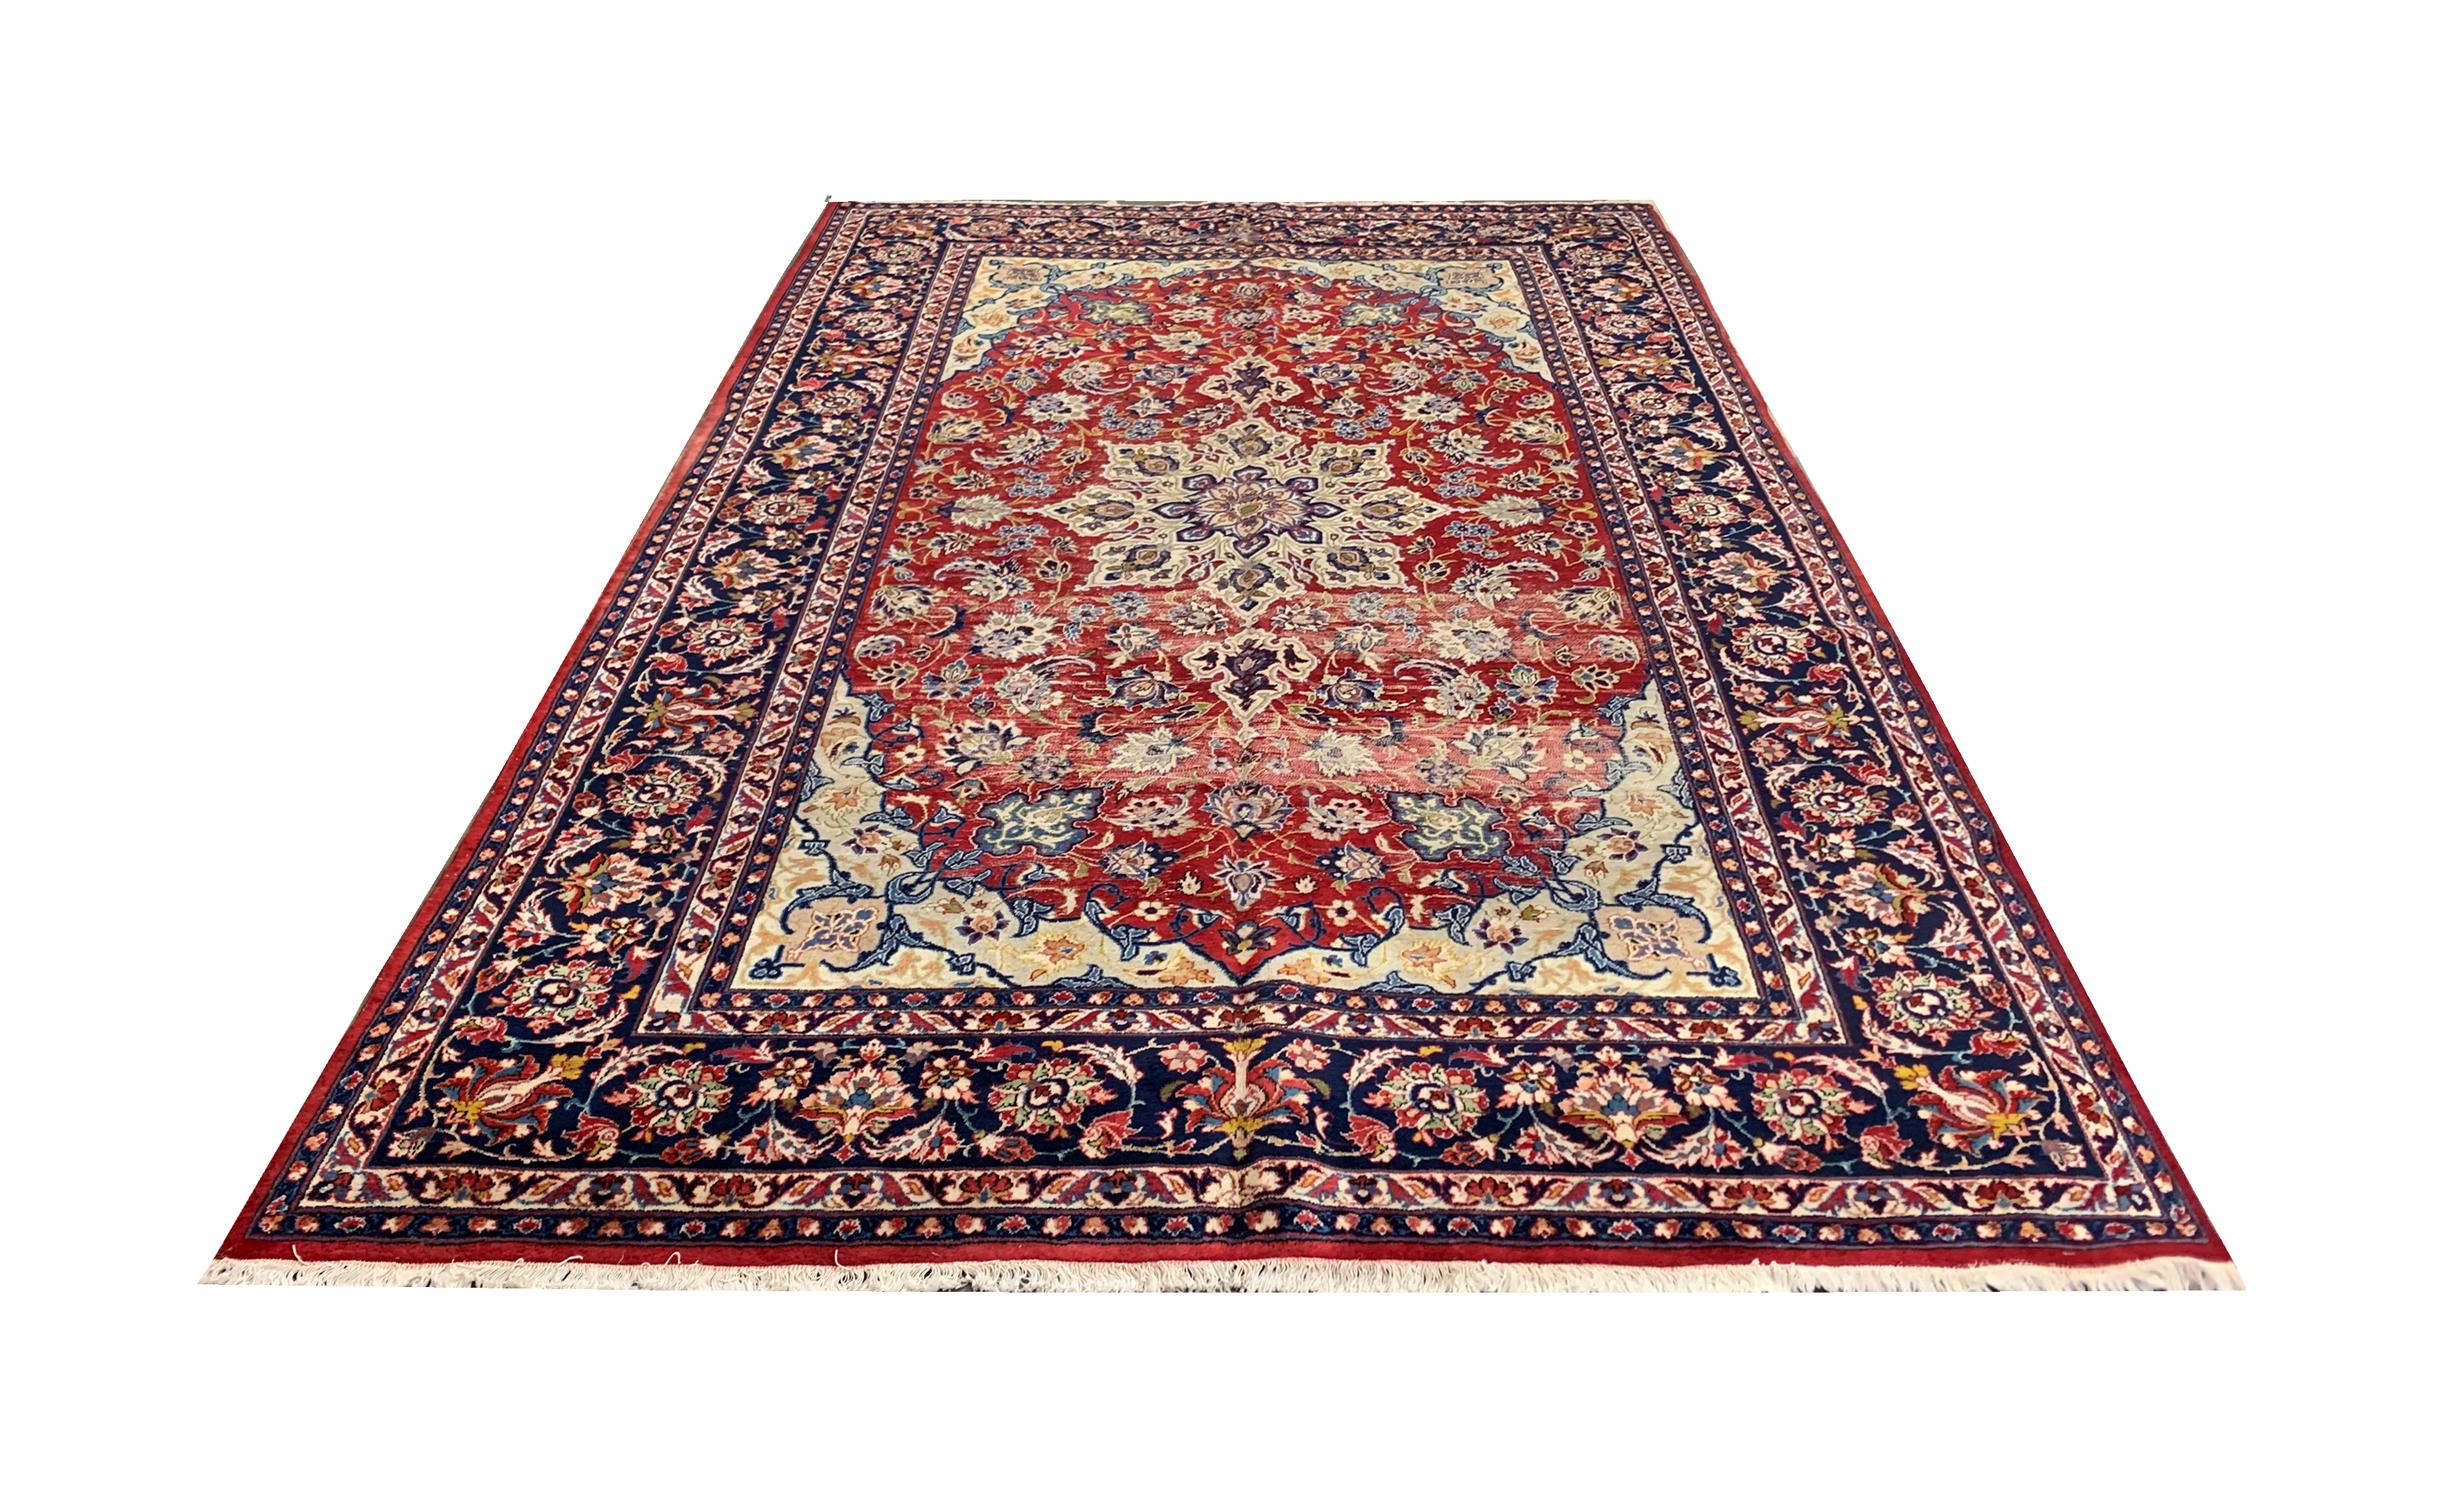 This traditional vintage carpet is a fine example of carpets from the 1940s. Woven with a rich red background with blue, beige and cream accents that make up the floral symmetrical design. This has then been framed with a bold repeating pattern